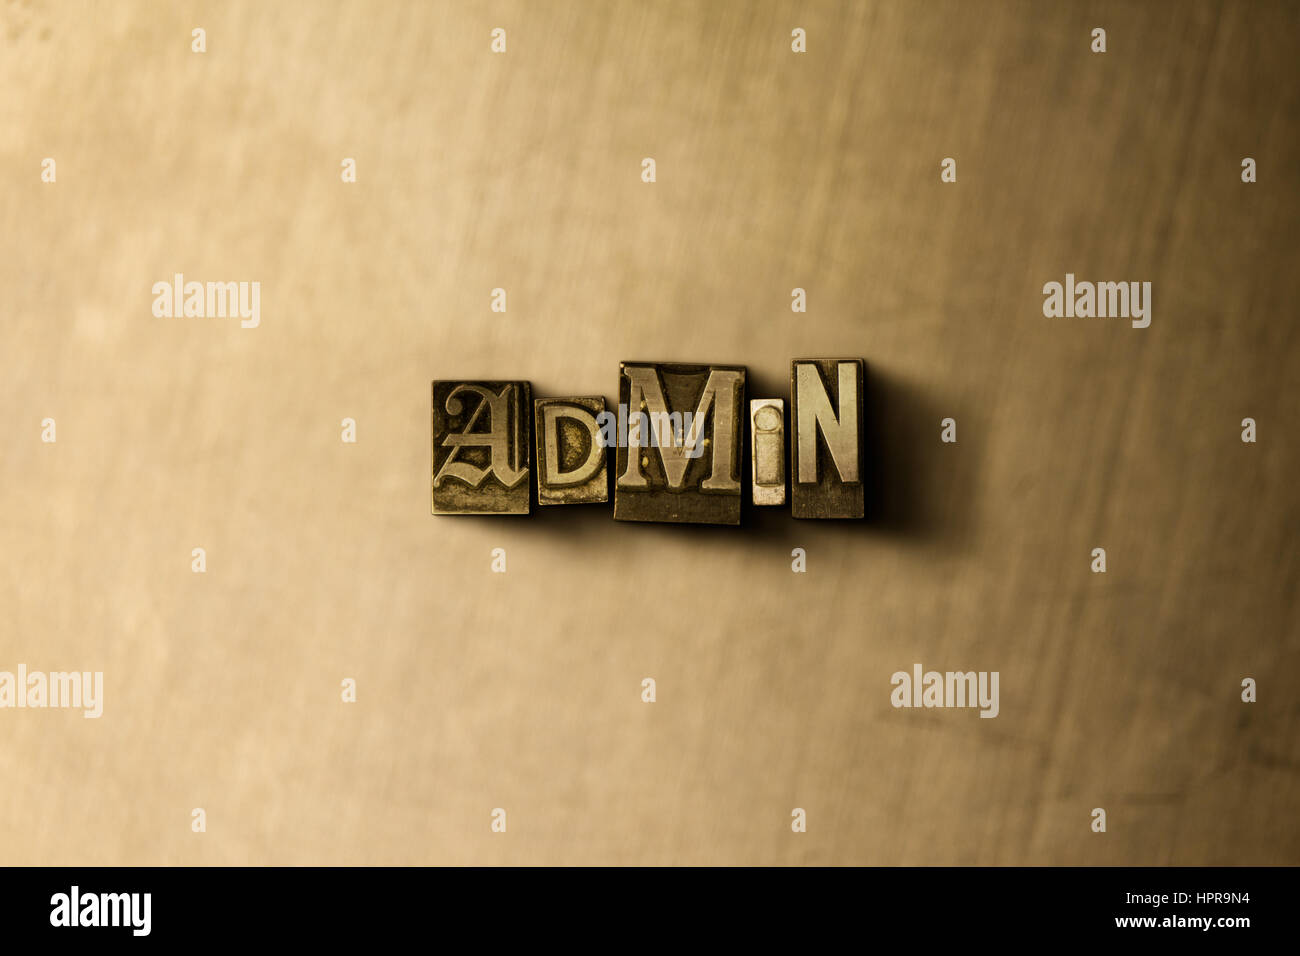 ADMIN - close-up of grungy vintage typeset word on metal backdrop. Royalty free stock illustration.  Can be used for online banner ads and direct mail Stock Photo